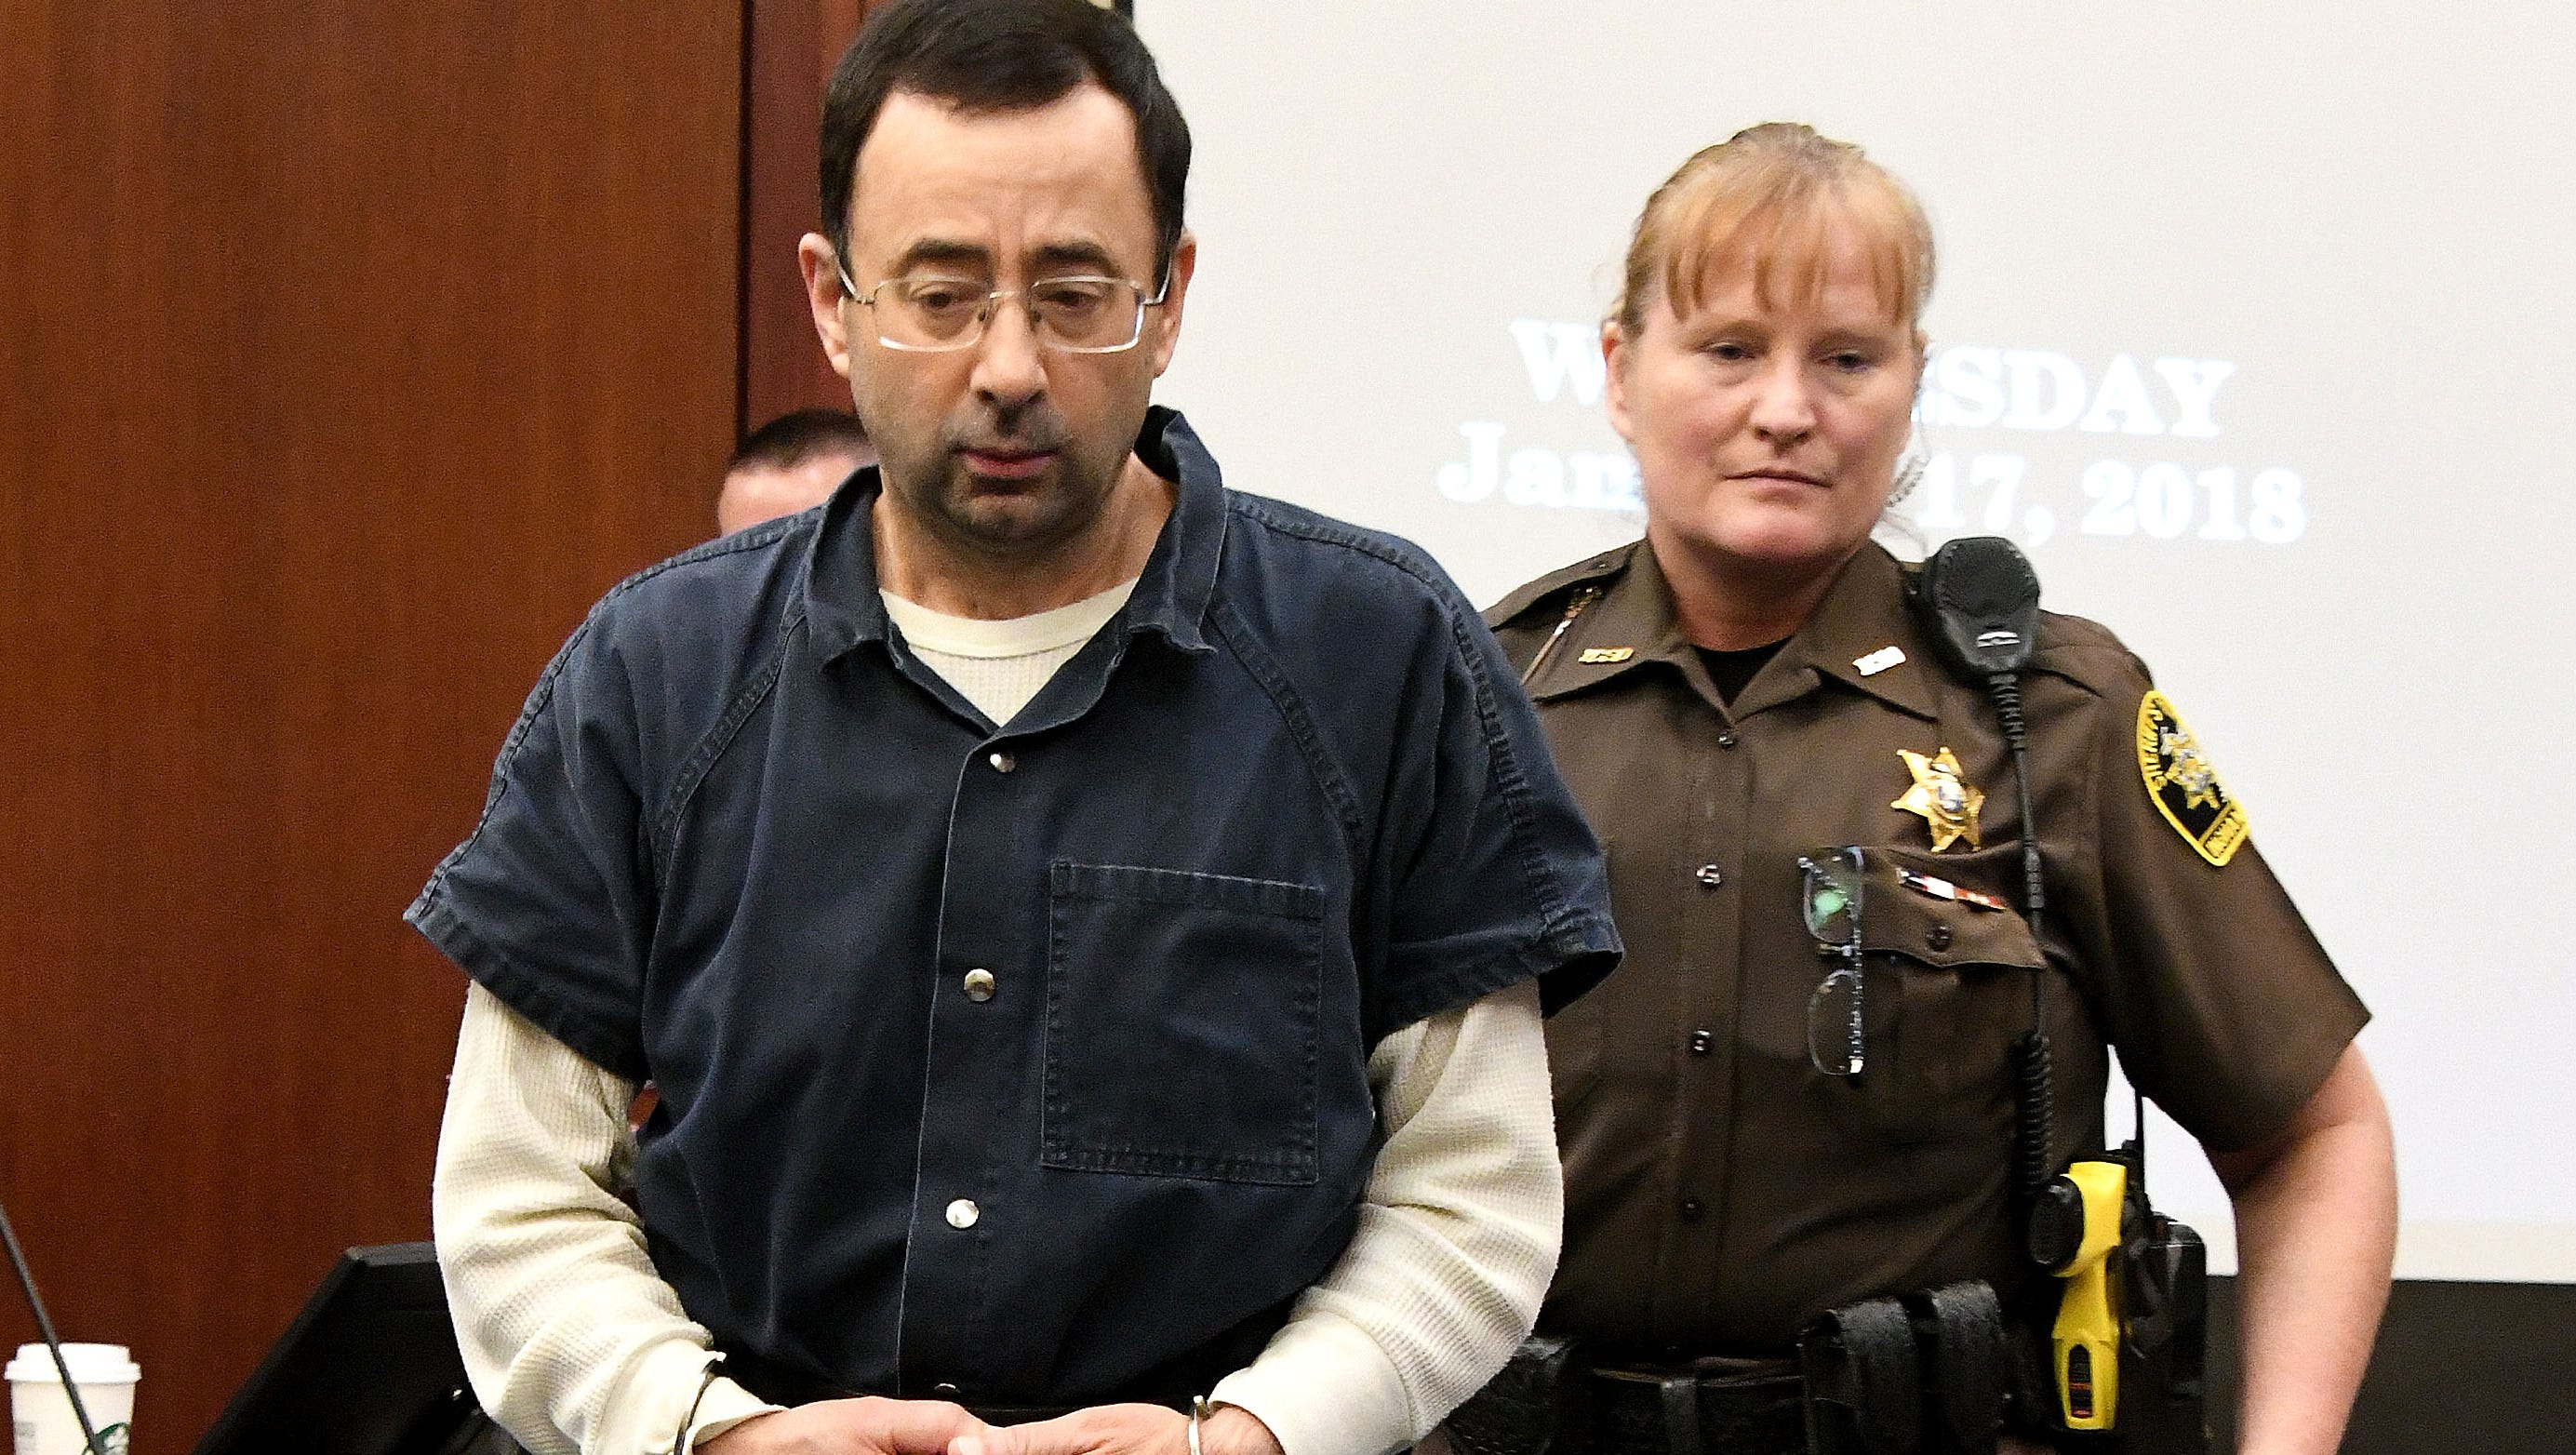 Larry Nassar's pattern of sexual abuse spanned at least two decades, from his days as a Michigan State medical school student to his career as a high-profile sports medicine doctor for MSU and USA Gymnastics. Browse ahead for a look at key figures in his chronology of abuse, reports that went ignored, and finally his conviction.